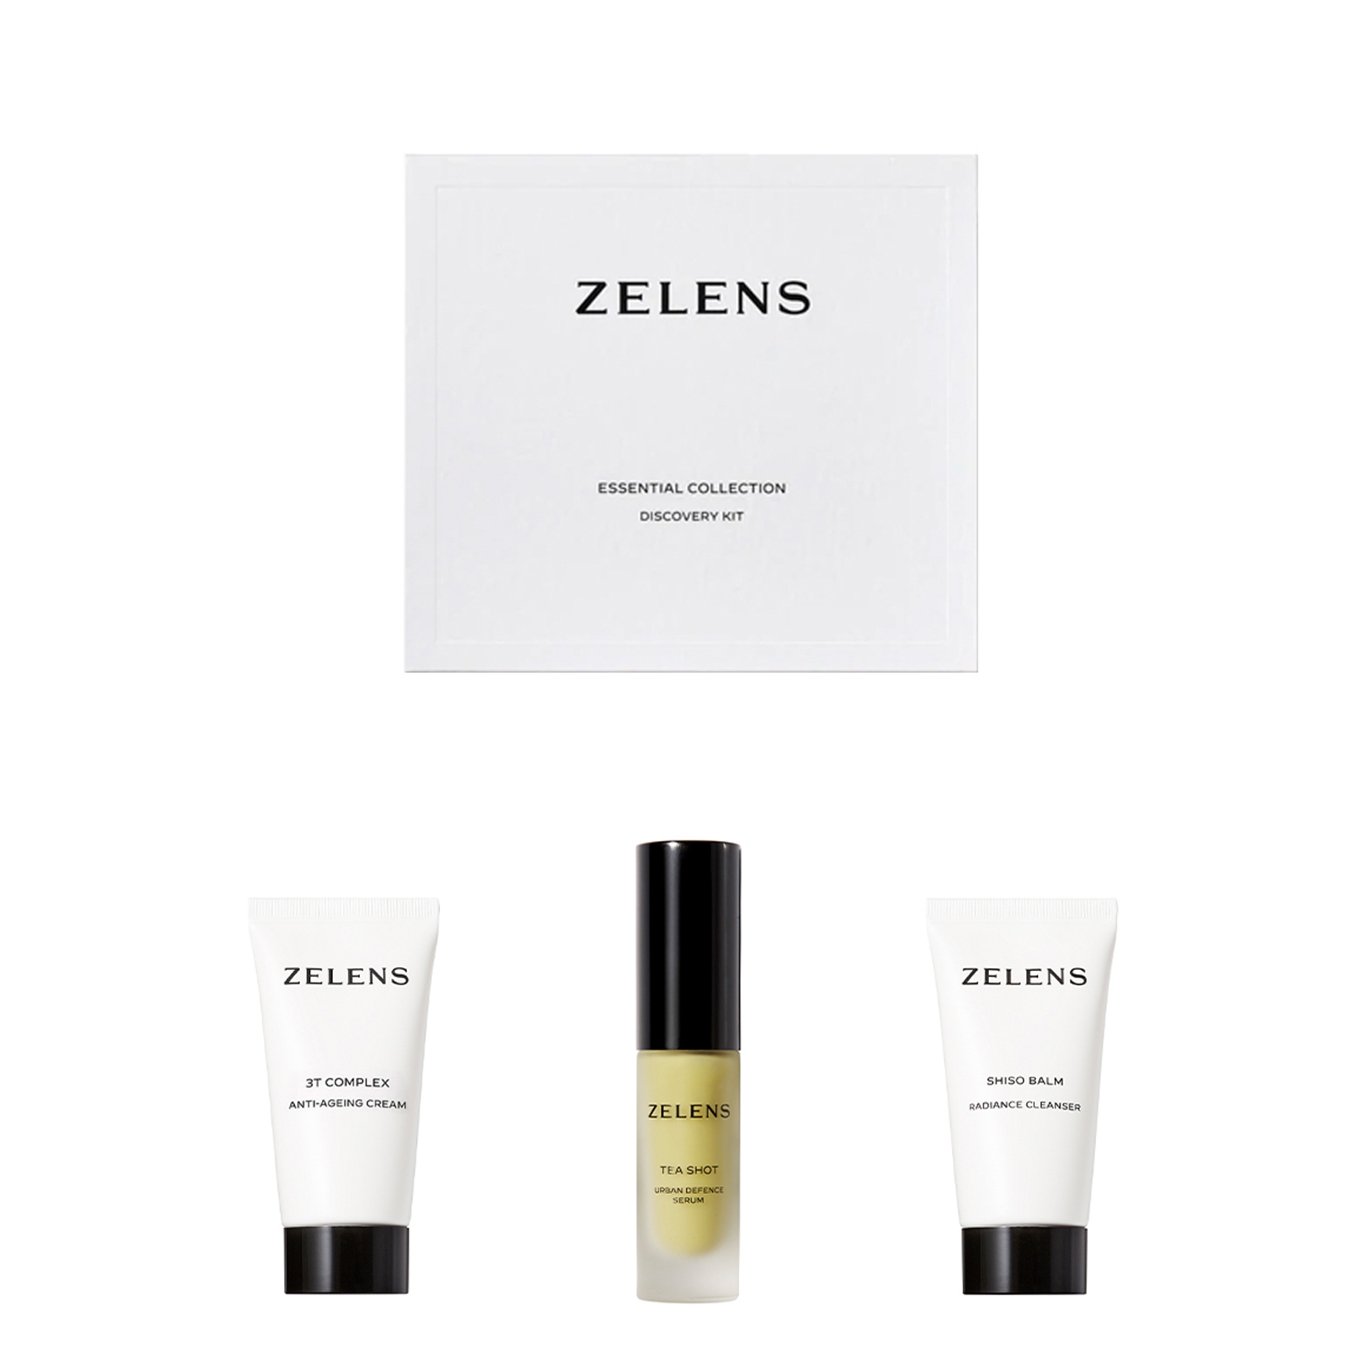 Essentials Collection, Gift Sets, Shiso Balm Radiance Cleanser